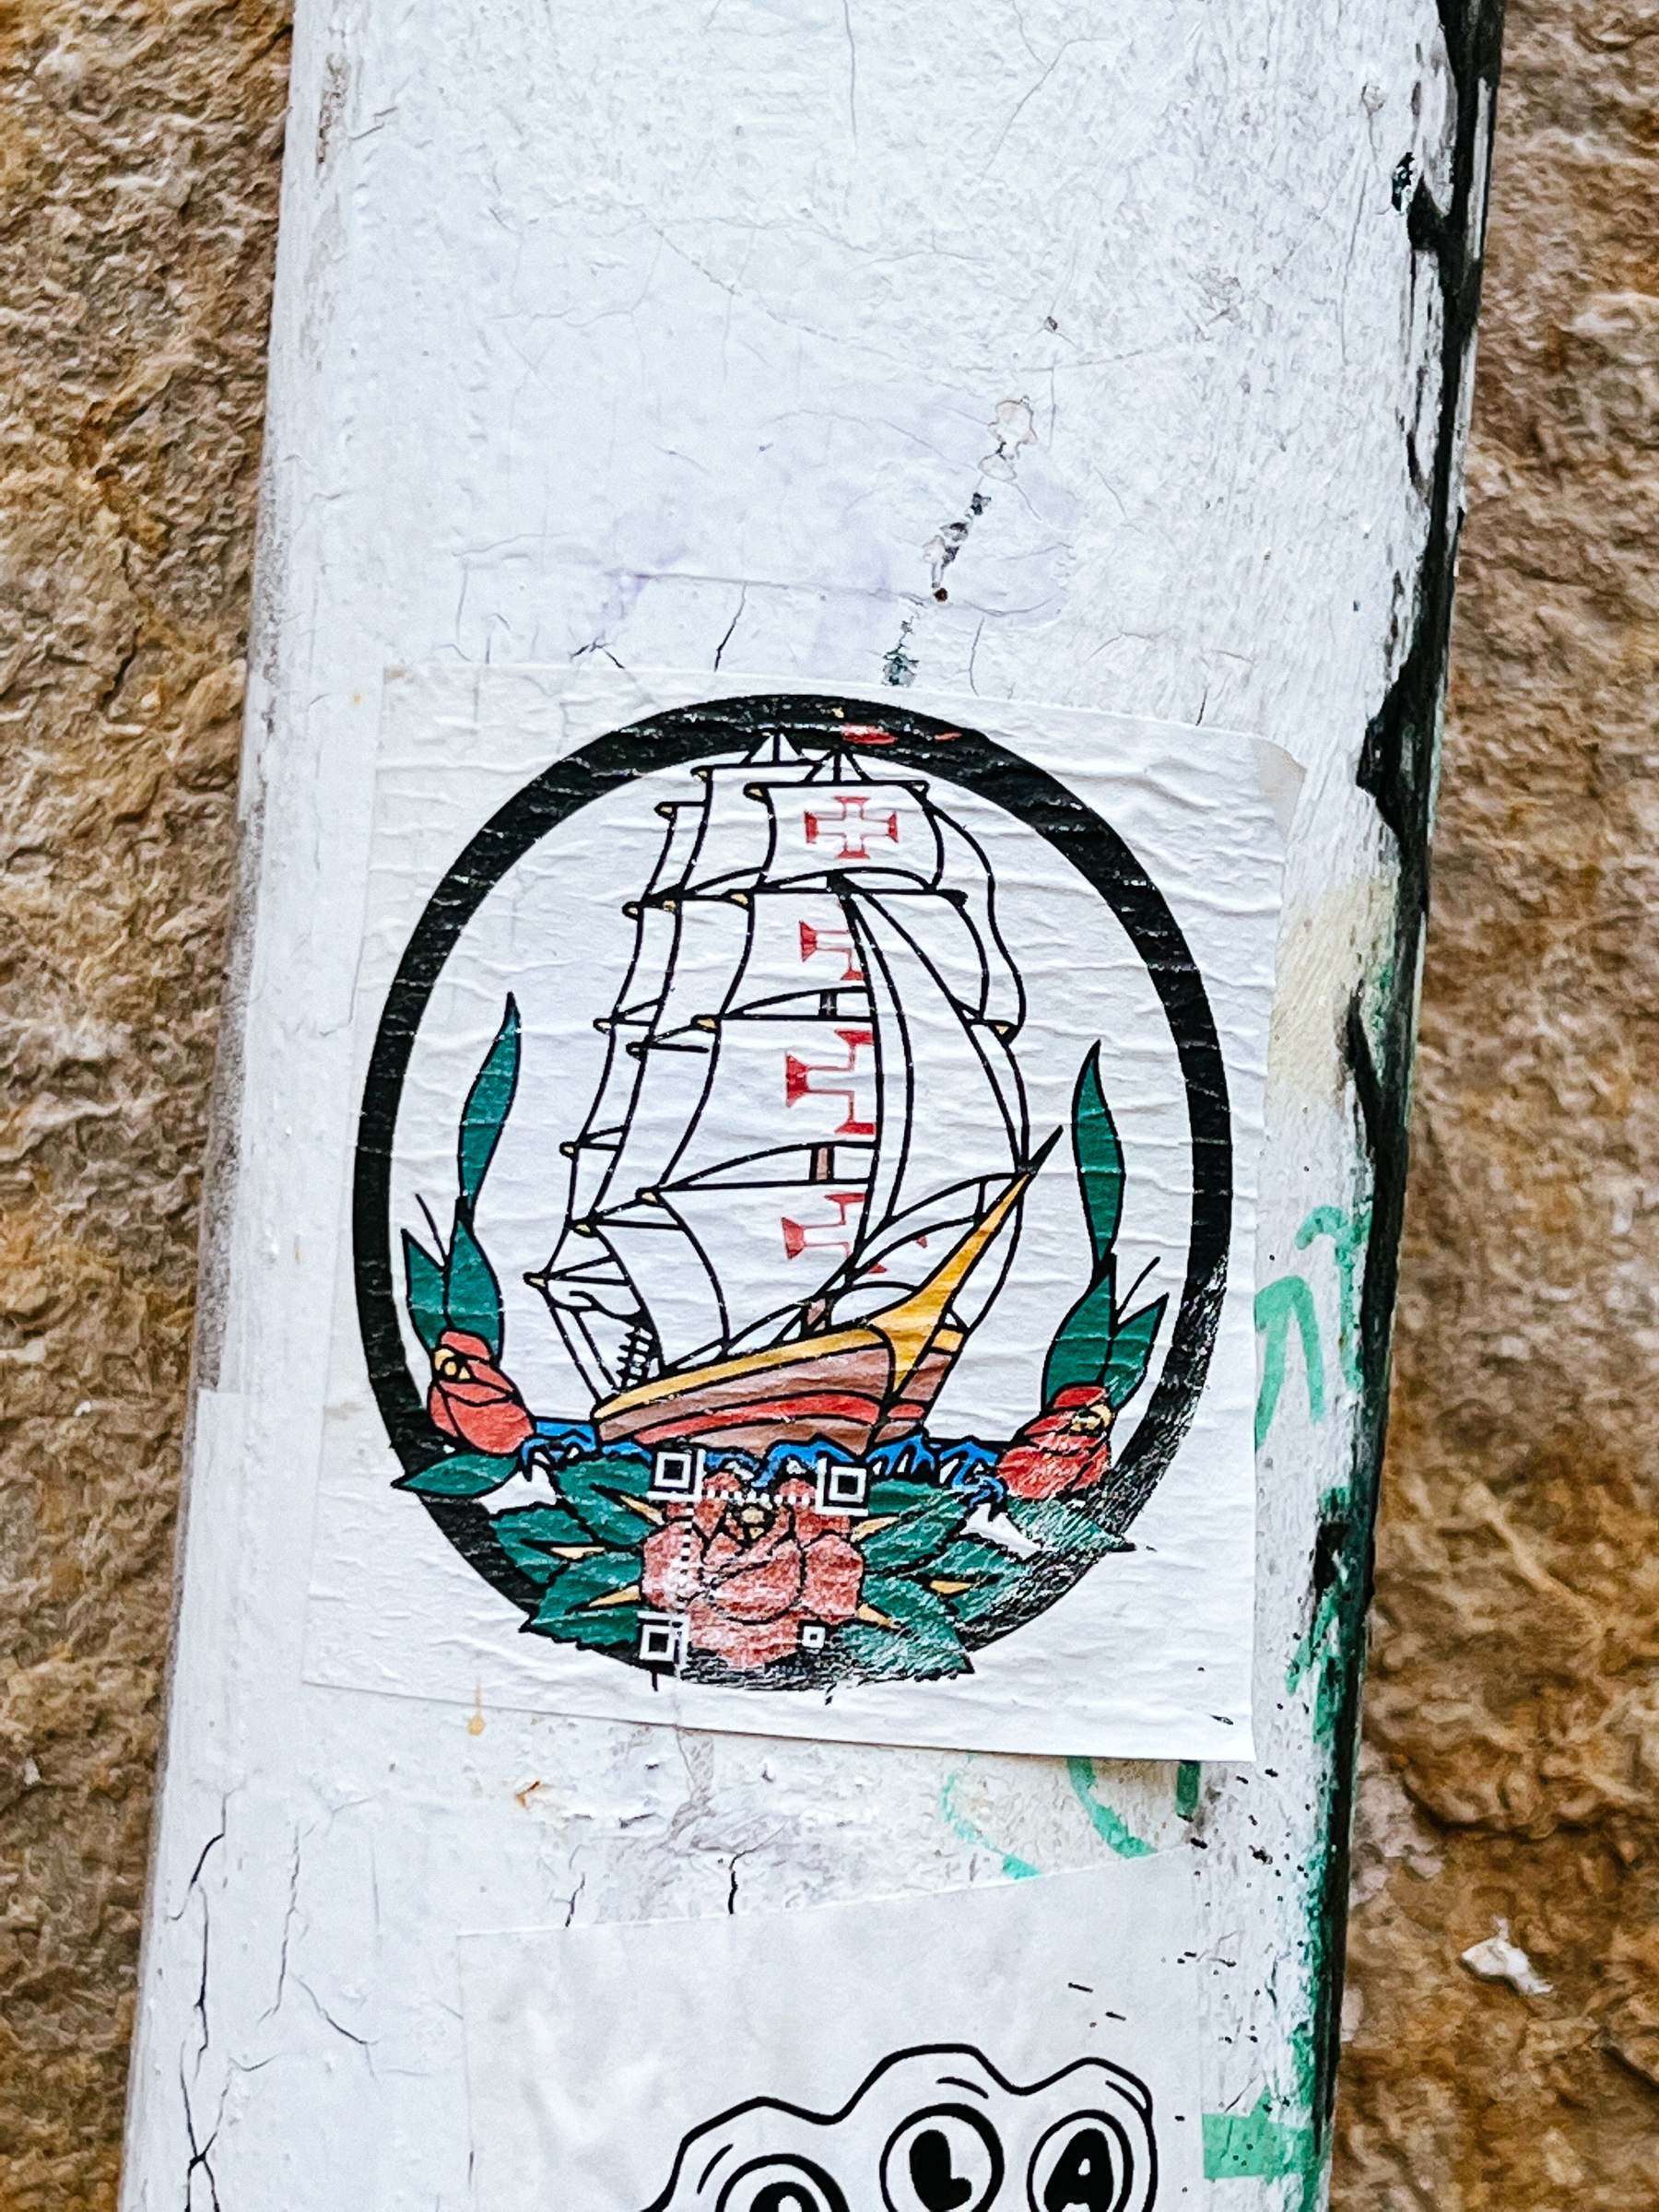 Sticker of a classic sailor tattoo, with a ship and flowers, but the classic ship on these tattoos has been replaced by a Portuguese caravel.